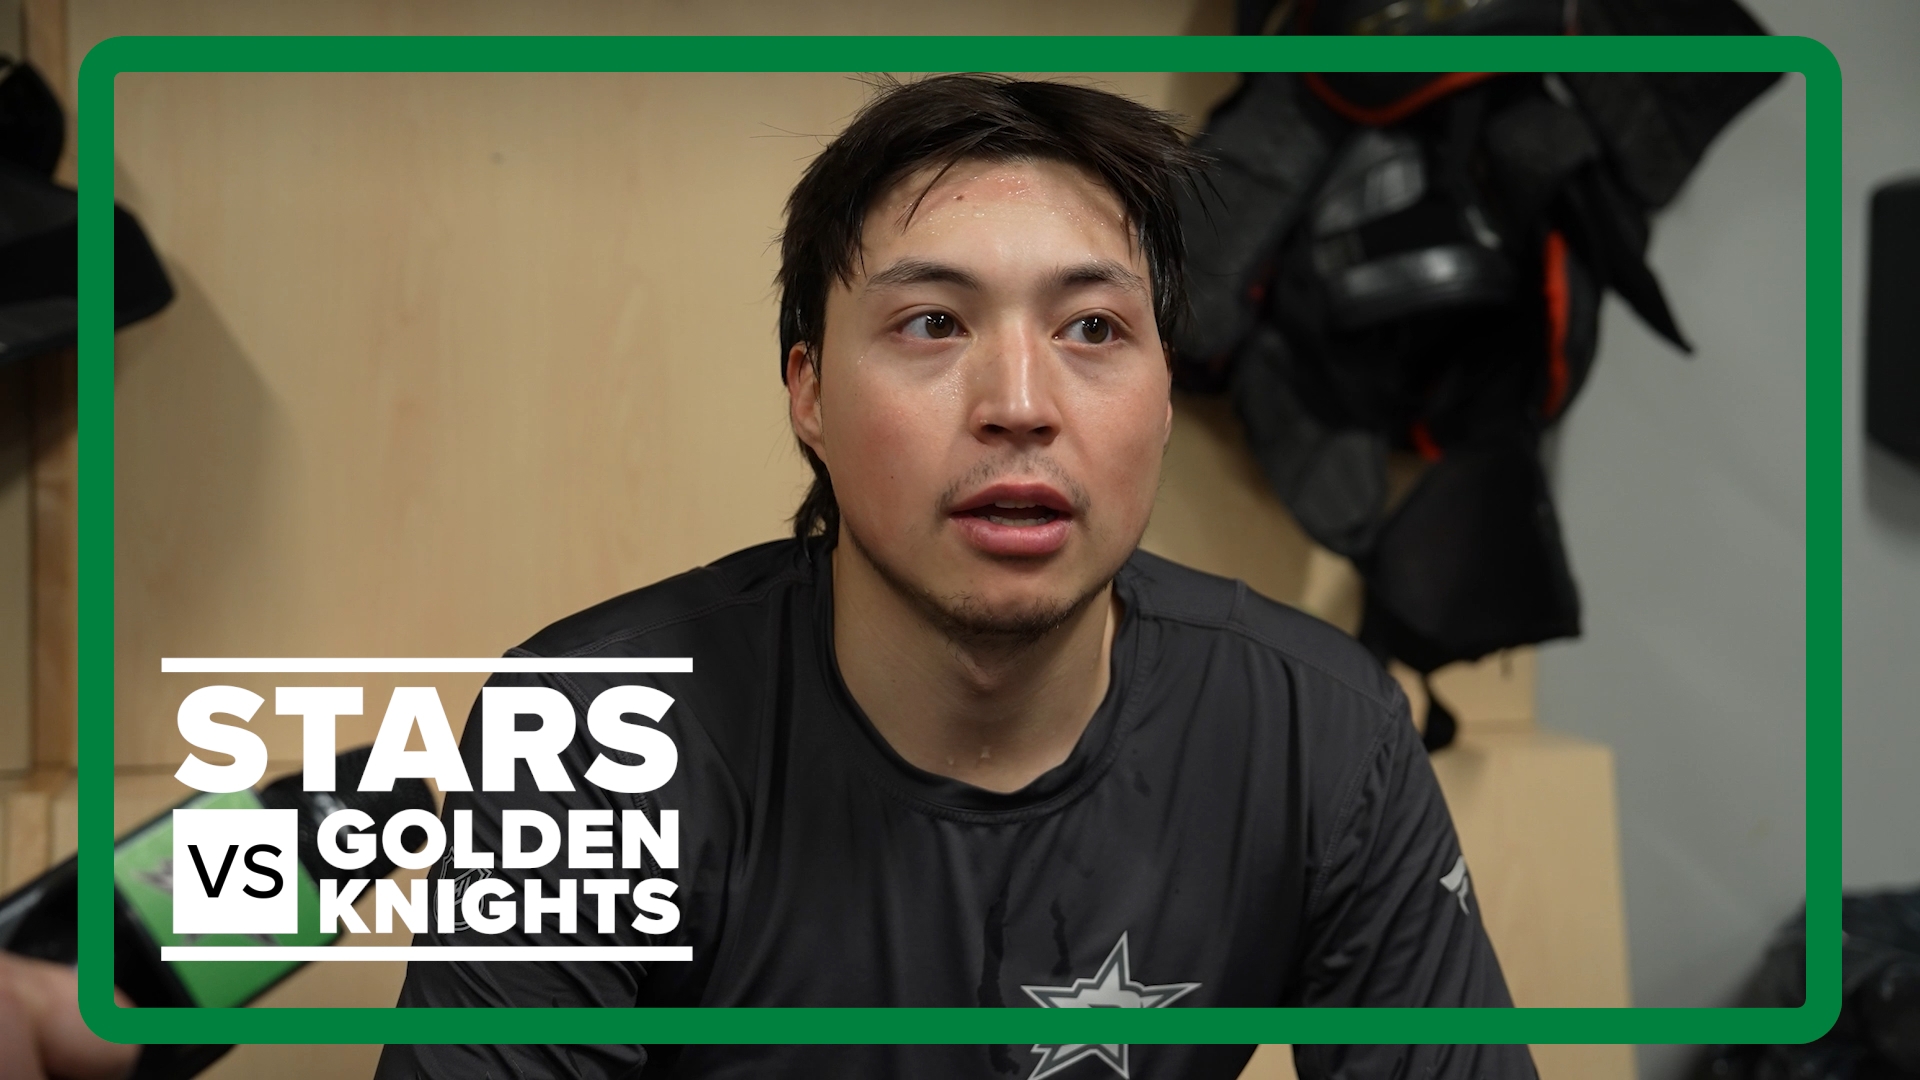 The Stars play the Golden Knights in Las Vegas at 8:30 p.m. Monday.